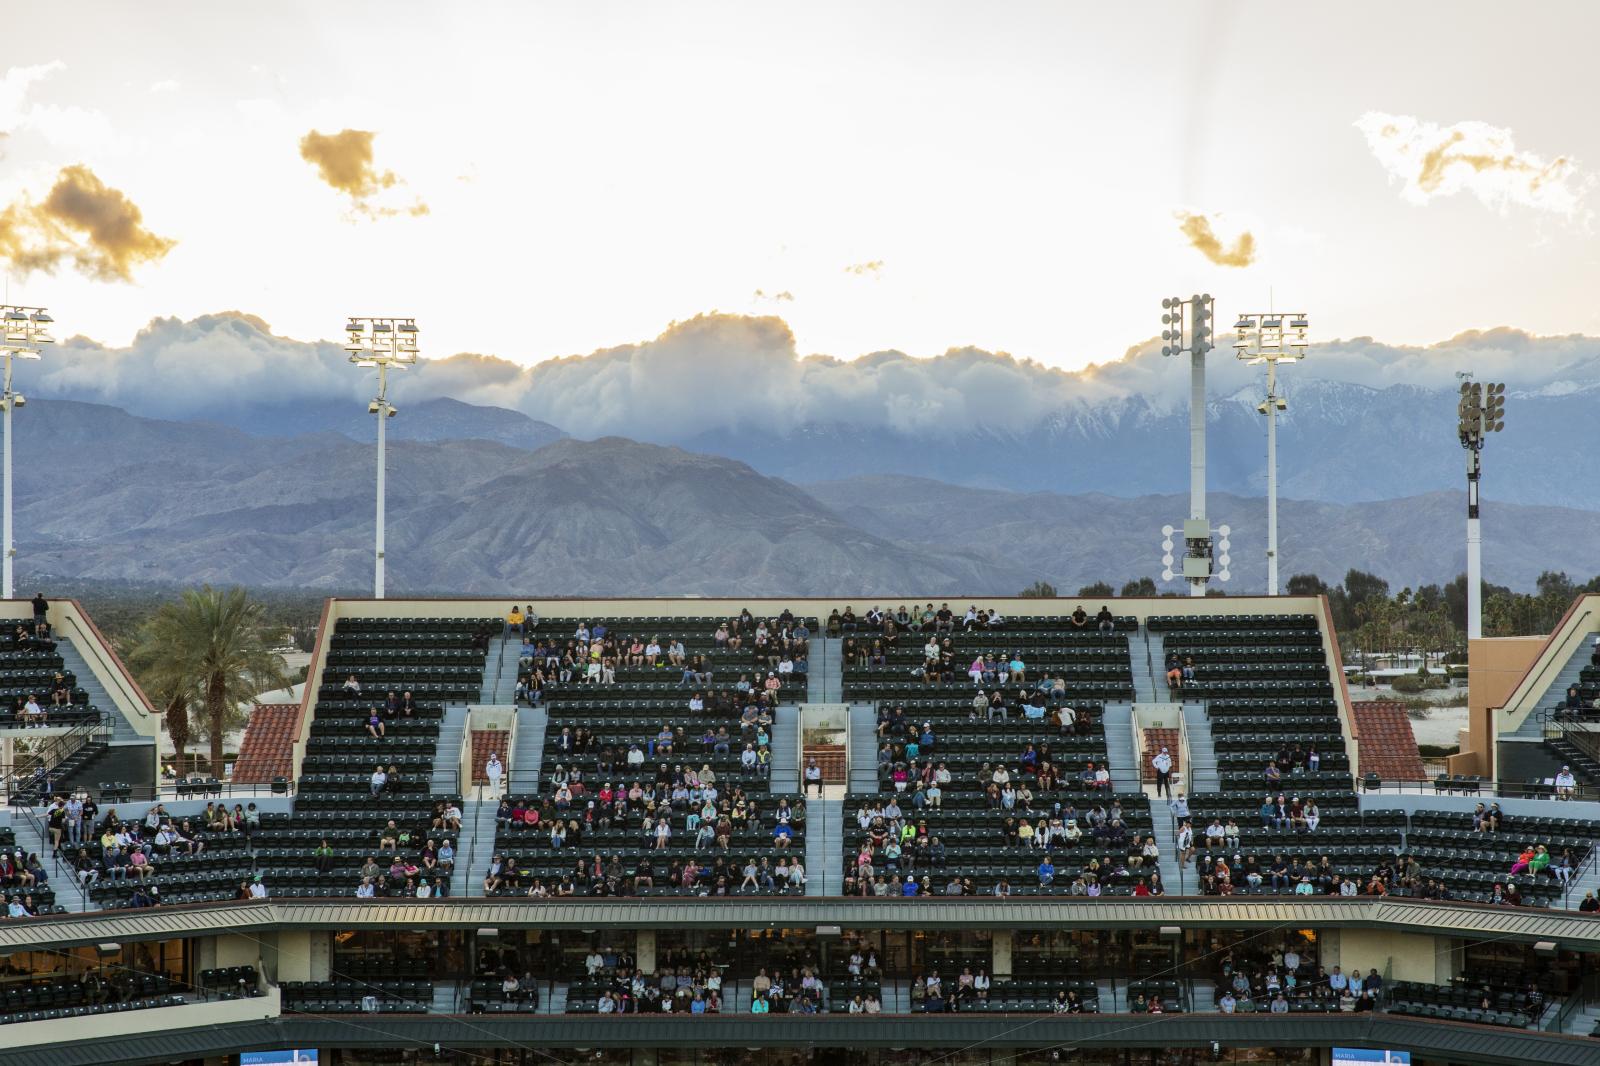 Sunset at Indian Wells Tennis Garden | Buy this image